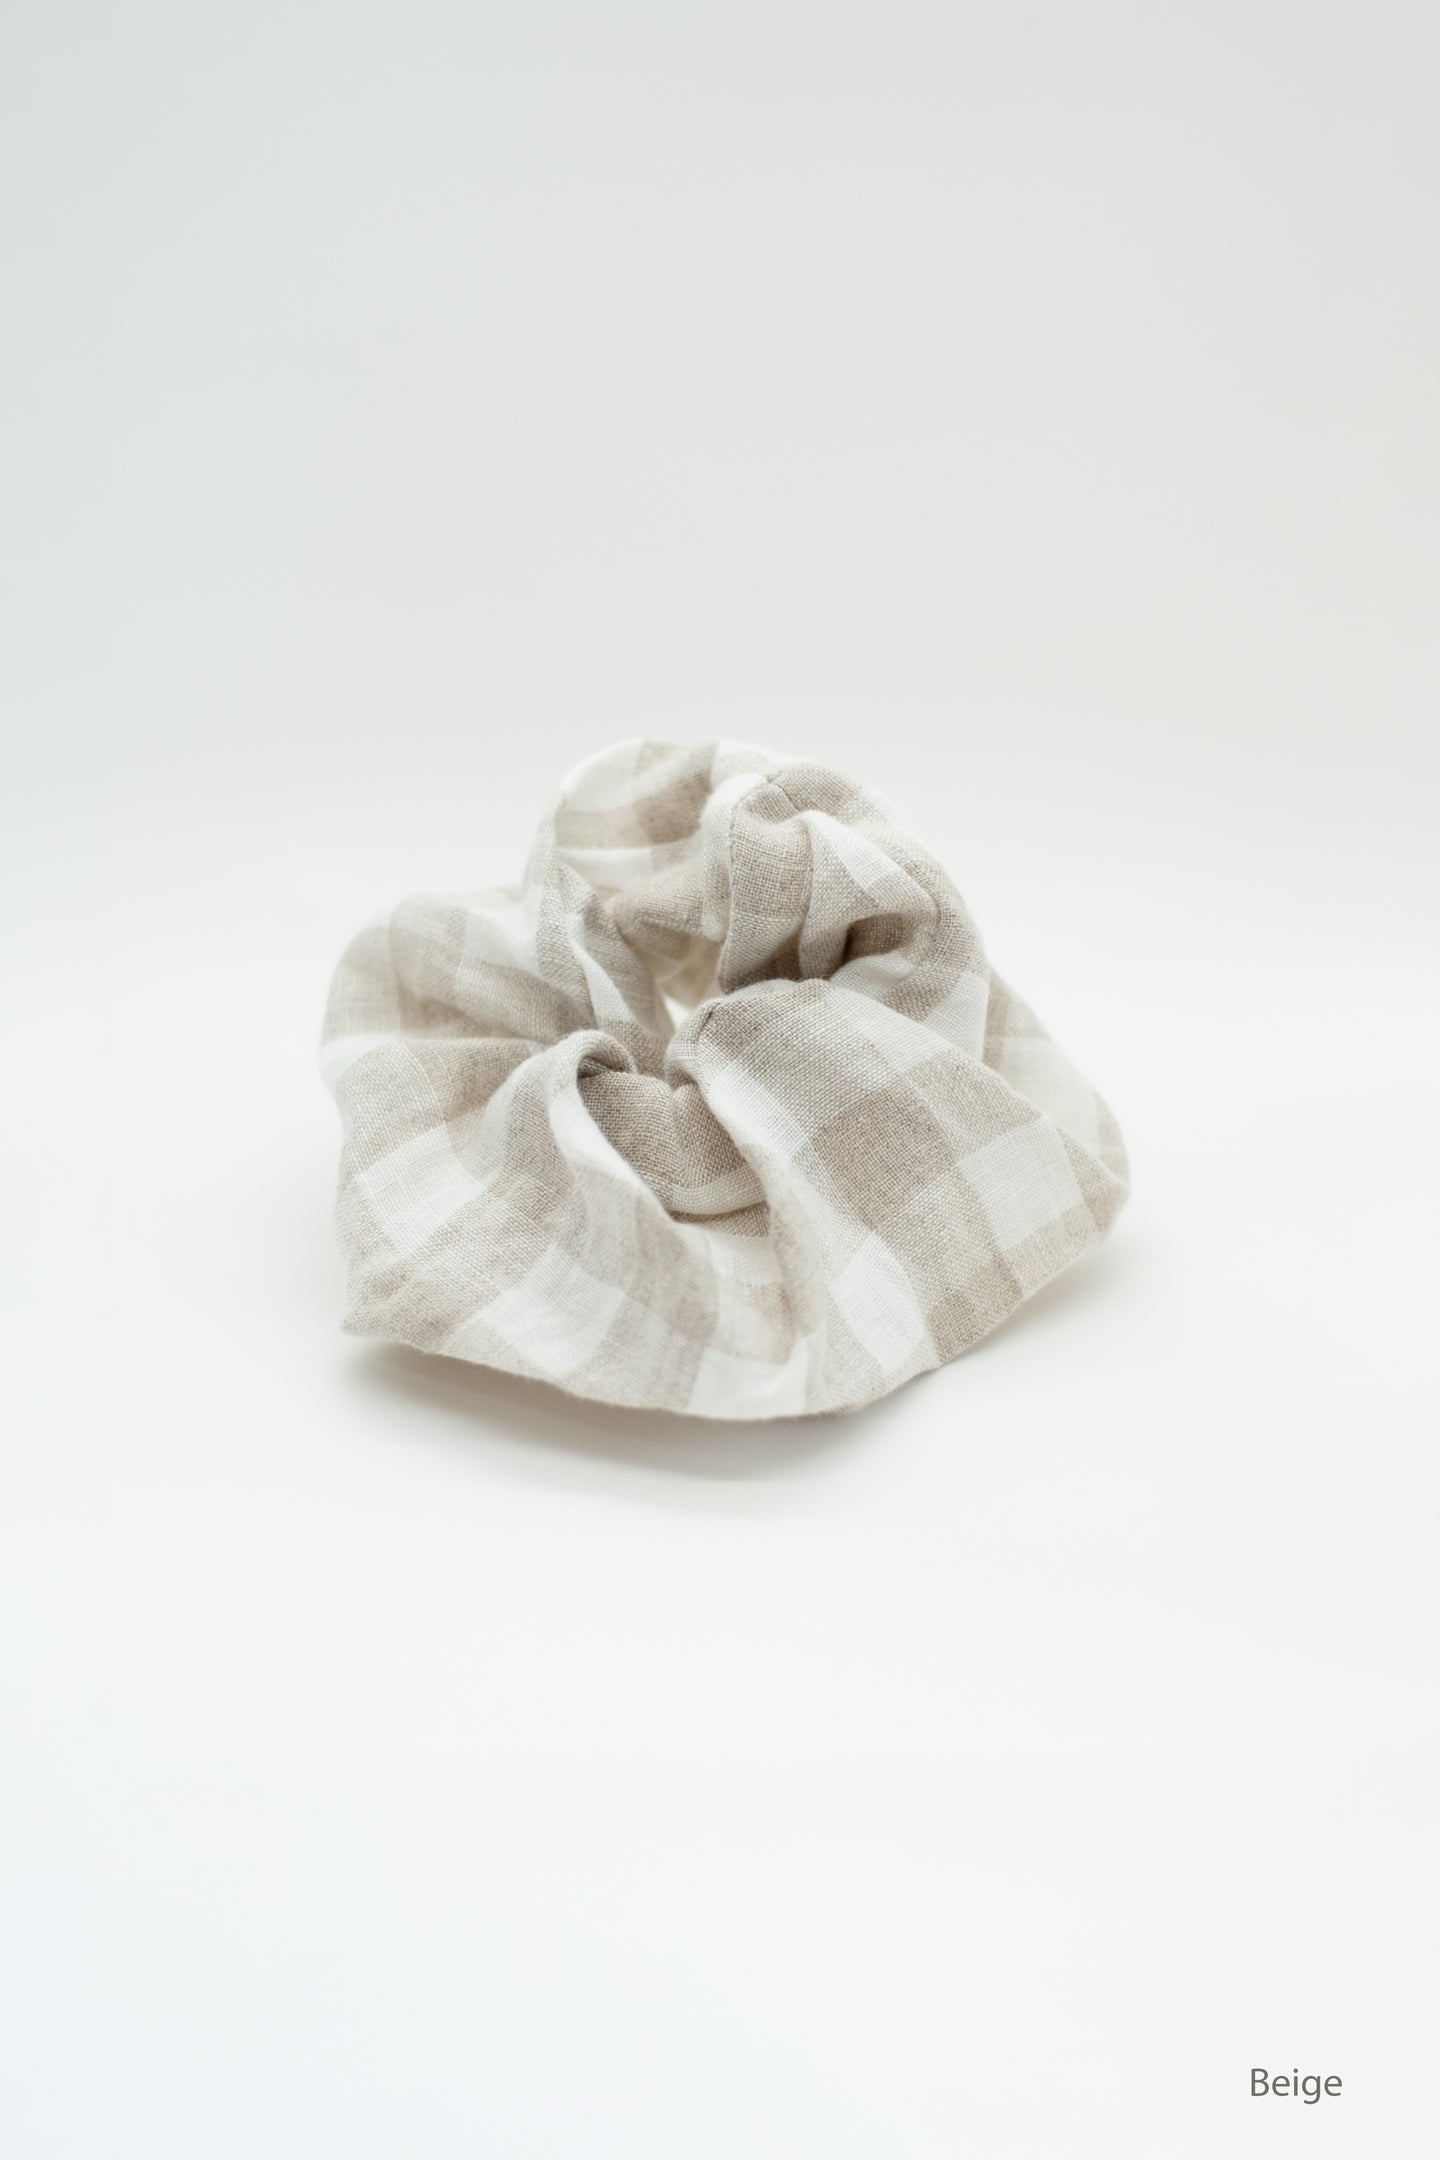 Linen Scrunchies / extra large